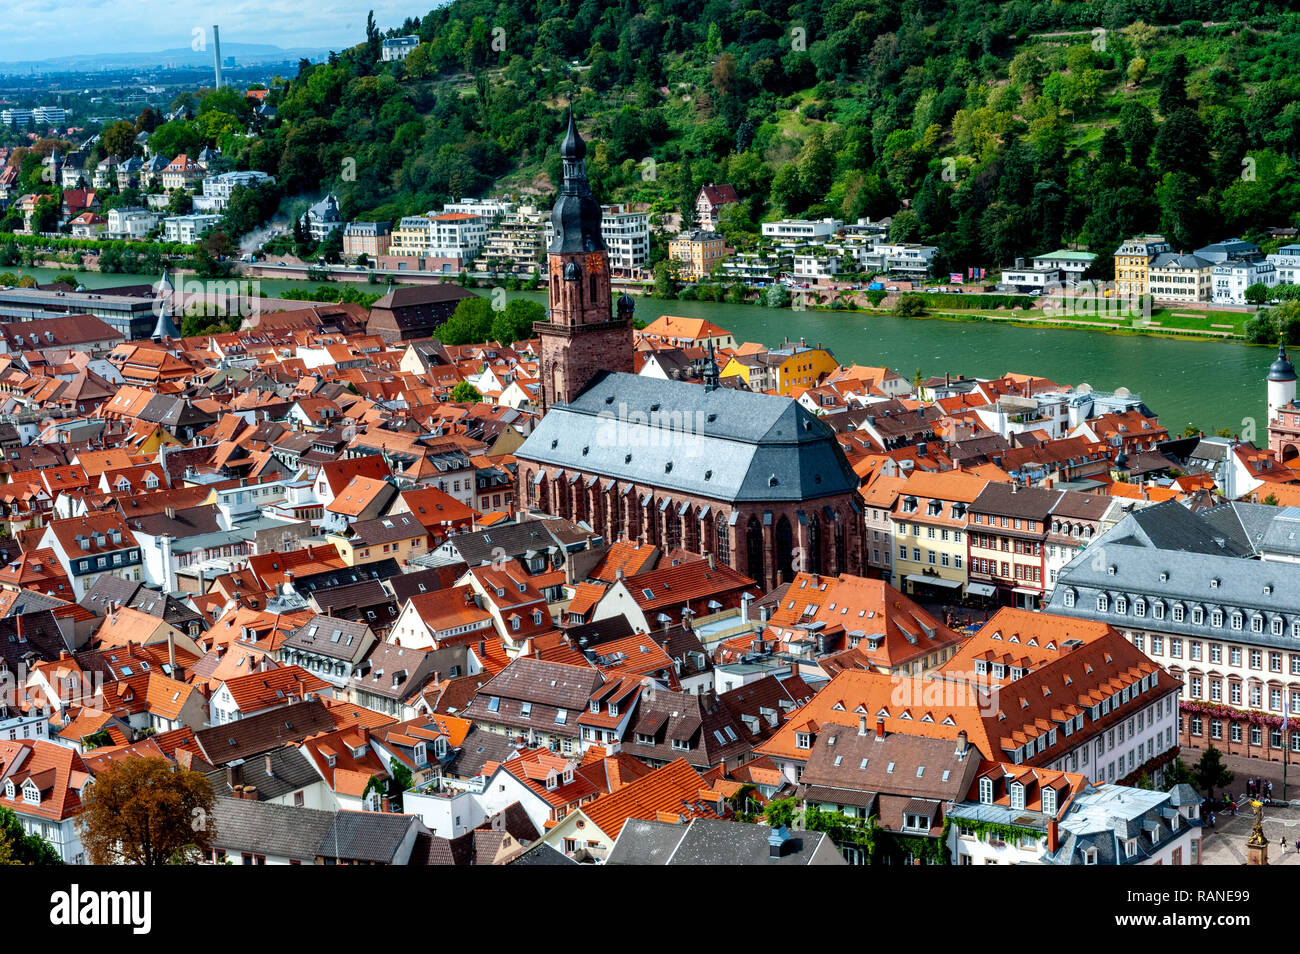 Ariel view of Heidelberg and the Church of the Holy Spirit Stock Photo